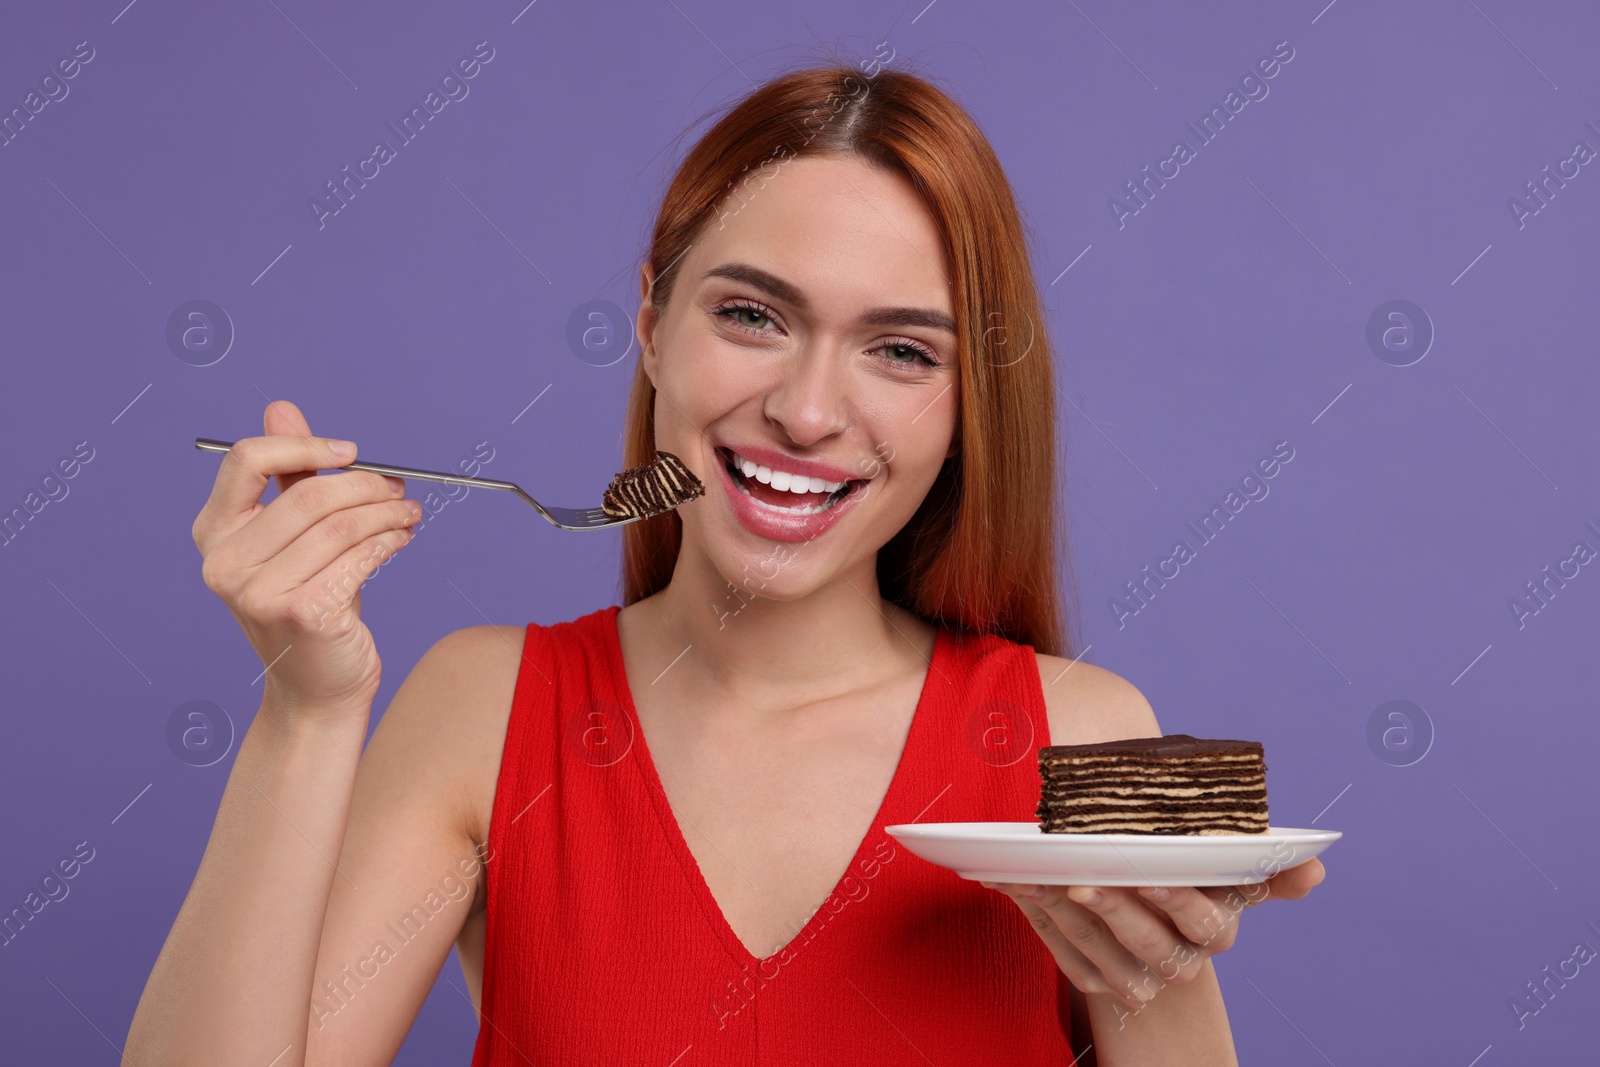 Photo of Young woman eating piece of tasty cake on purple background